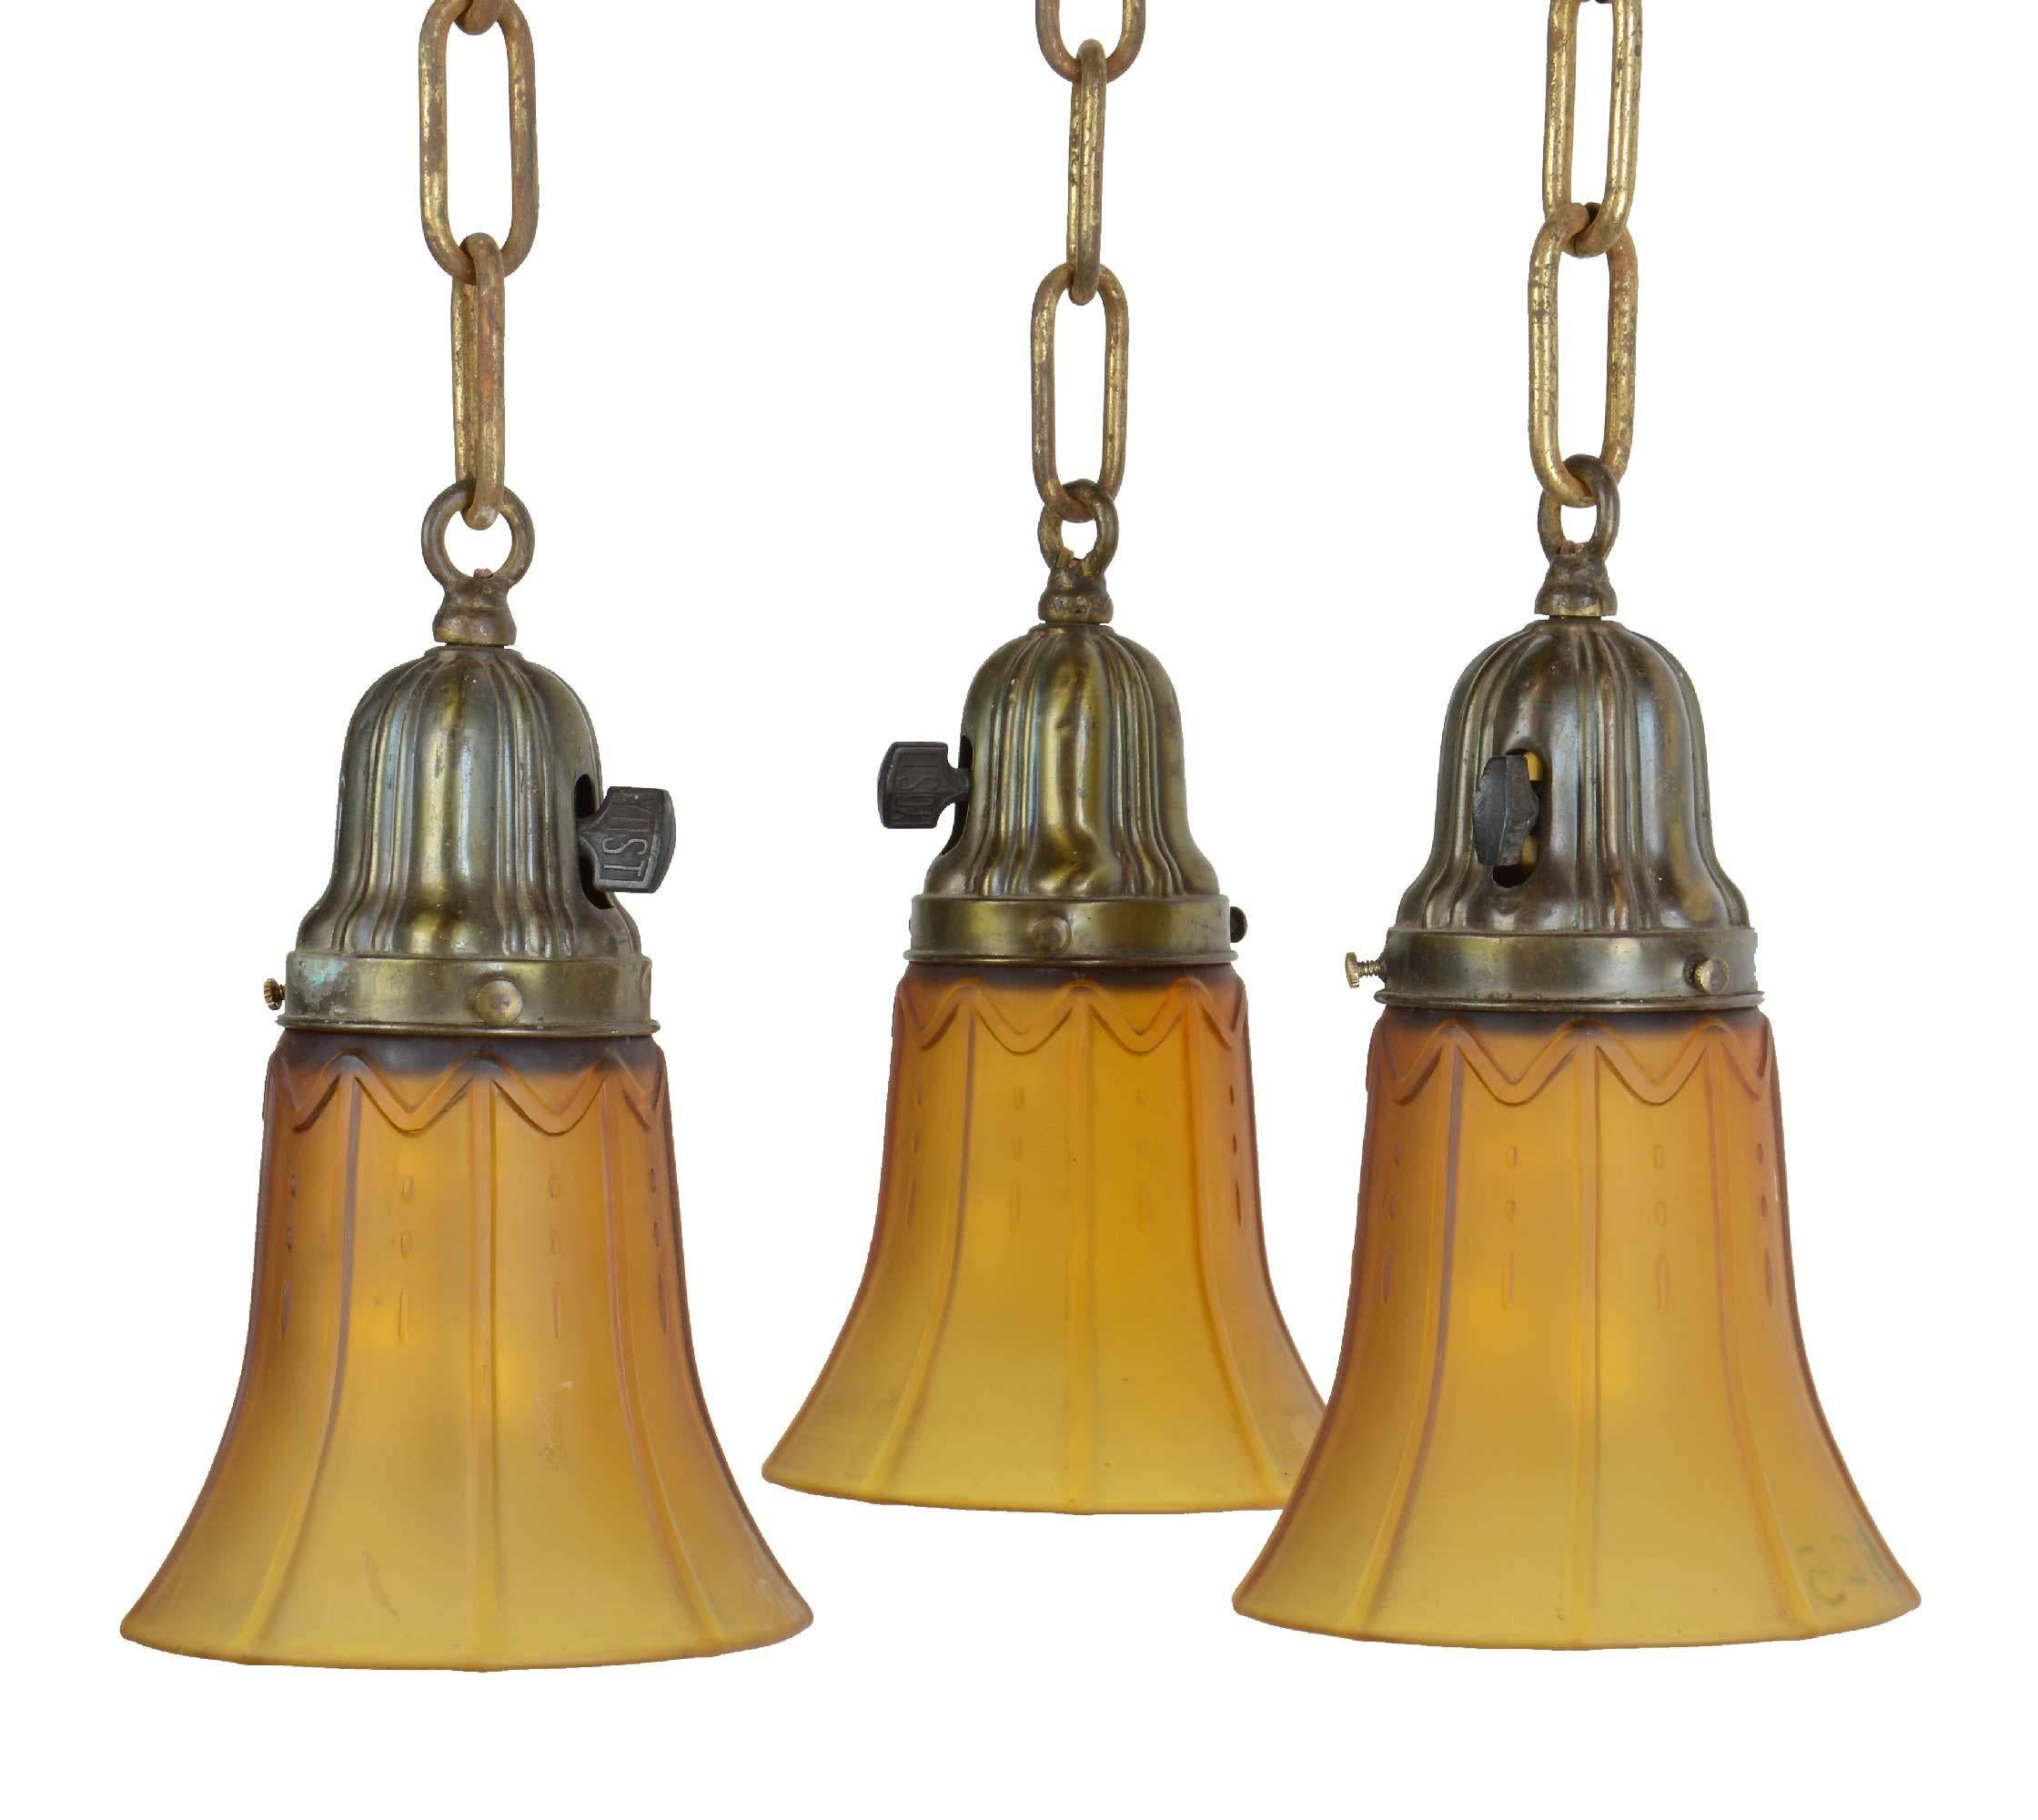 This Sheffield fixture features a large decorative ribbed canopy with acorn finial and three chains that drop down with matching fitters holding antique amber glass shades.

Finish: Original.
Country of origin: USA.
Three medium